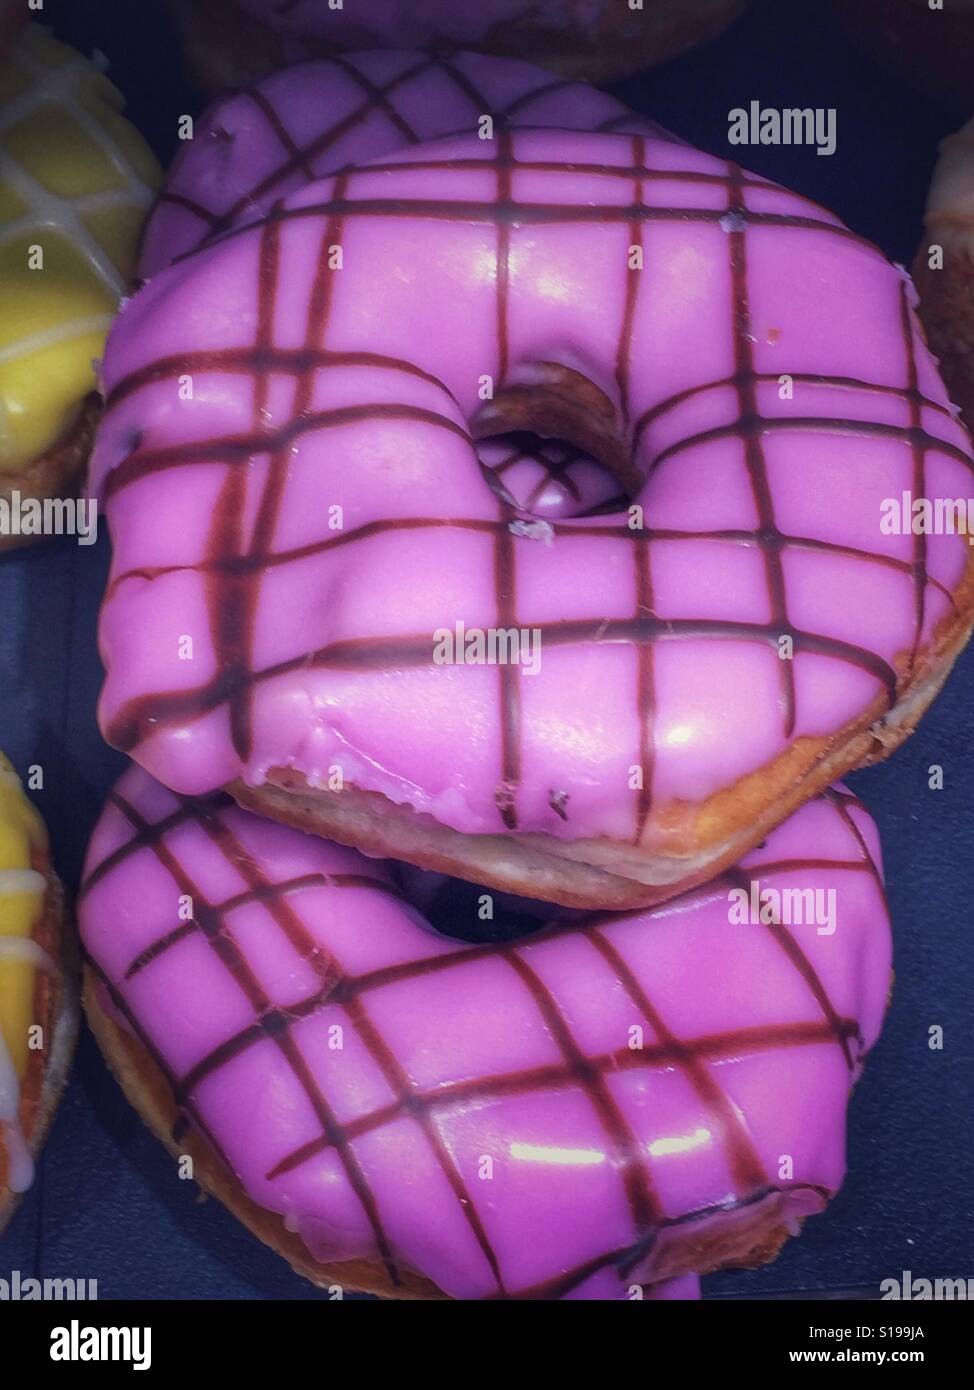 Lilac glazed doughnut lined  with chocolate detail Stock Photo